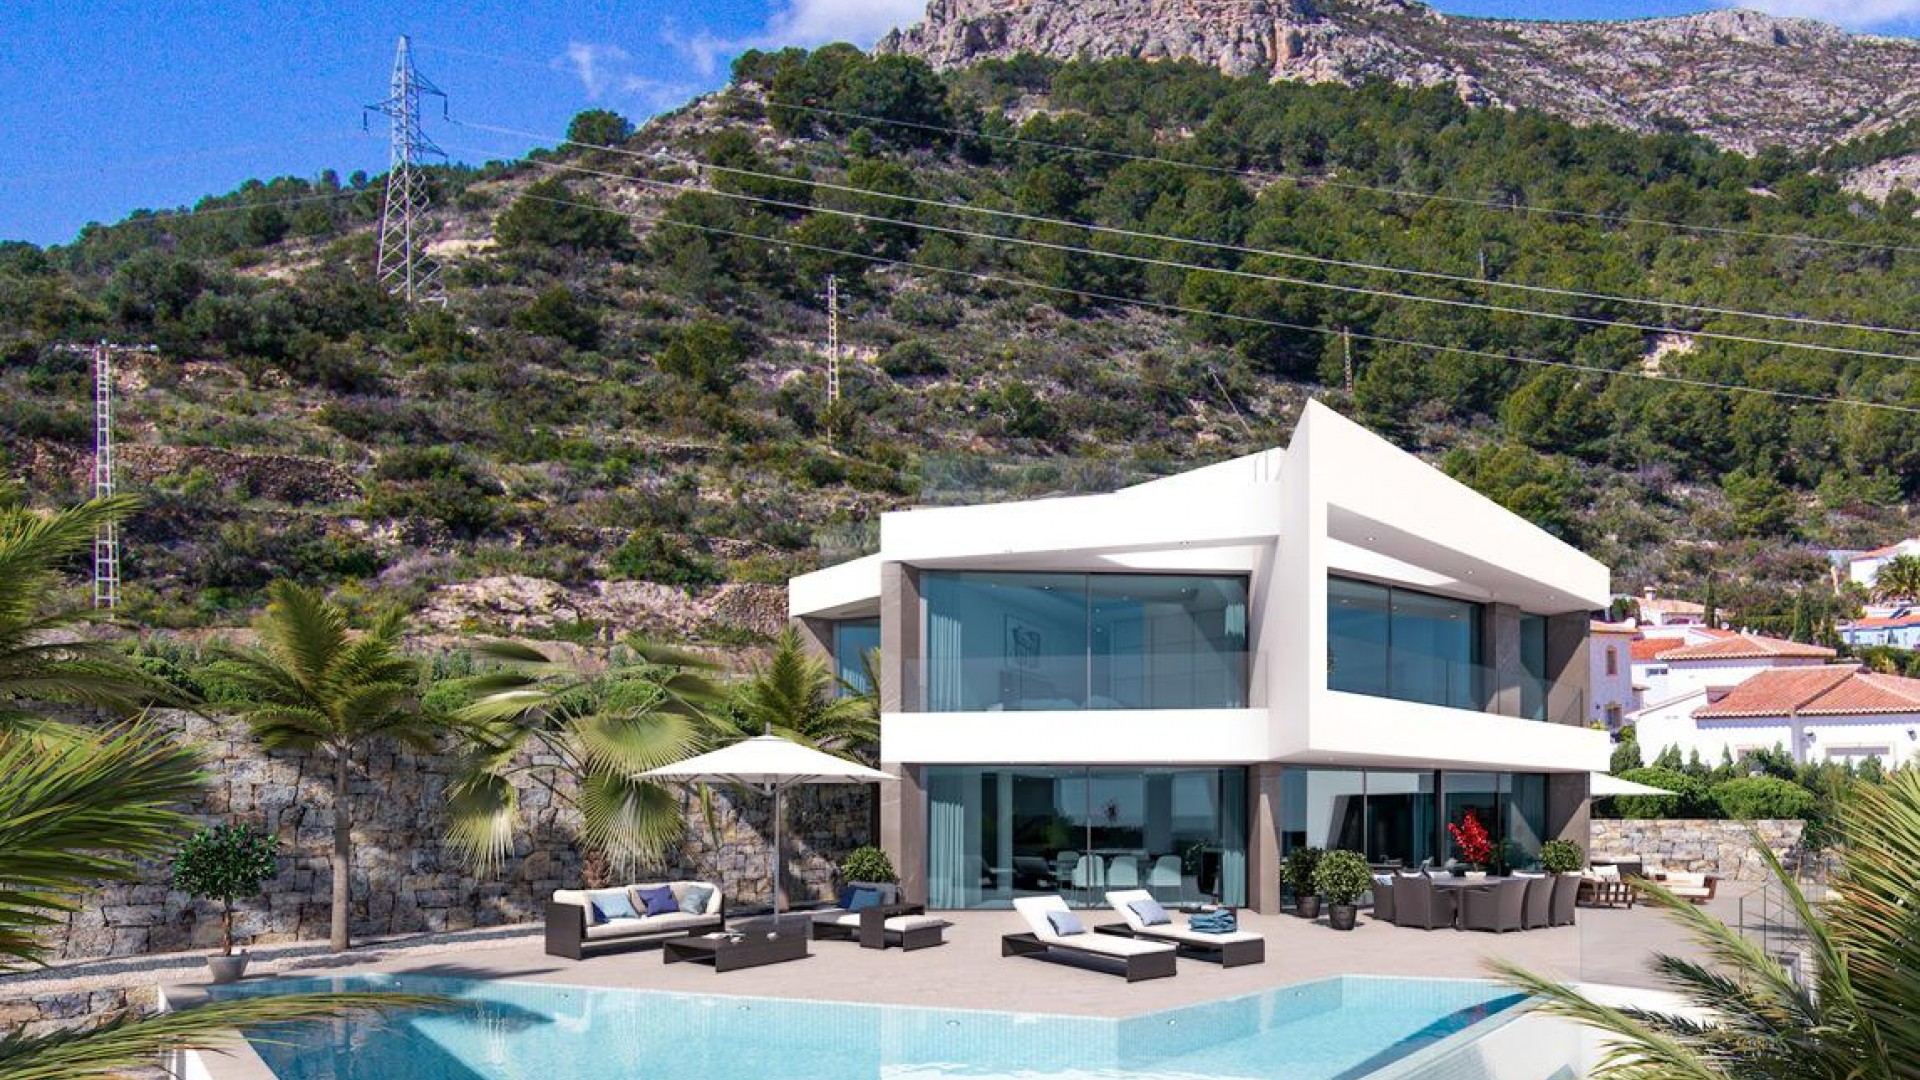 Modern luxury villa with fantastic sea view with 4 bedrooms and 6 bathrooms, 3 floors with lift, large swimming pool with fantastic view